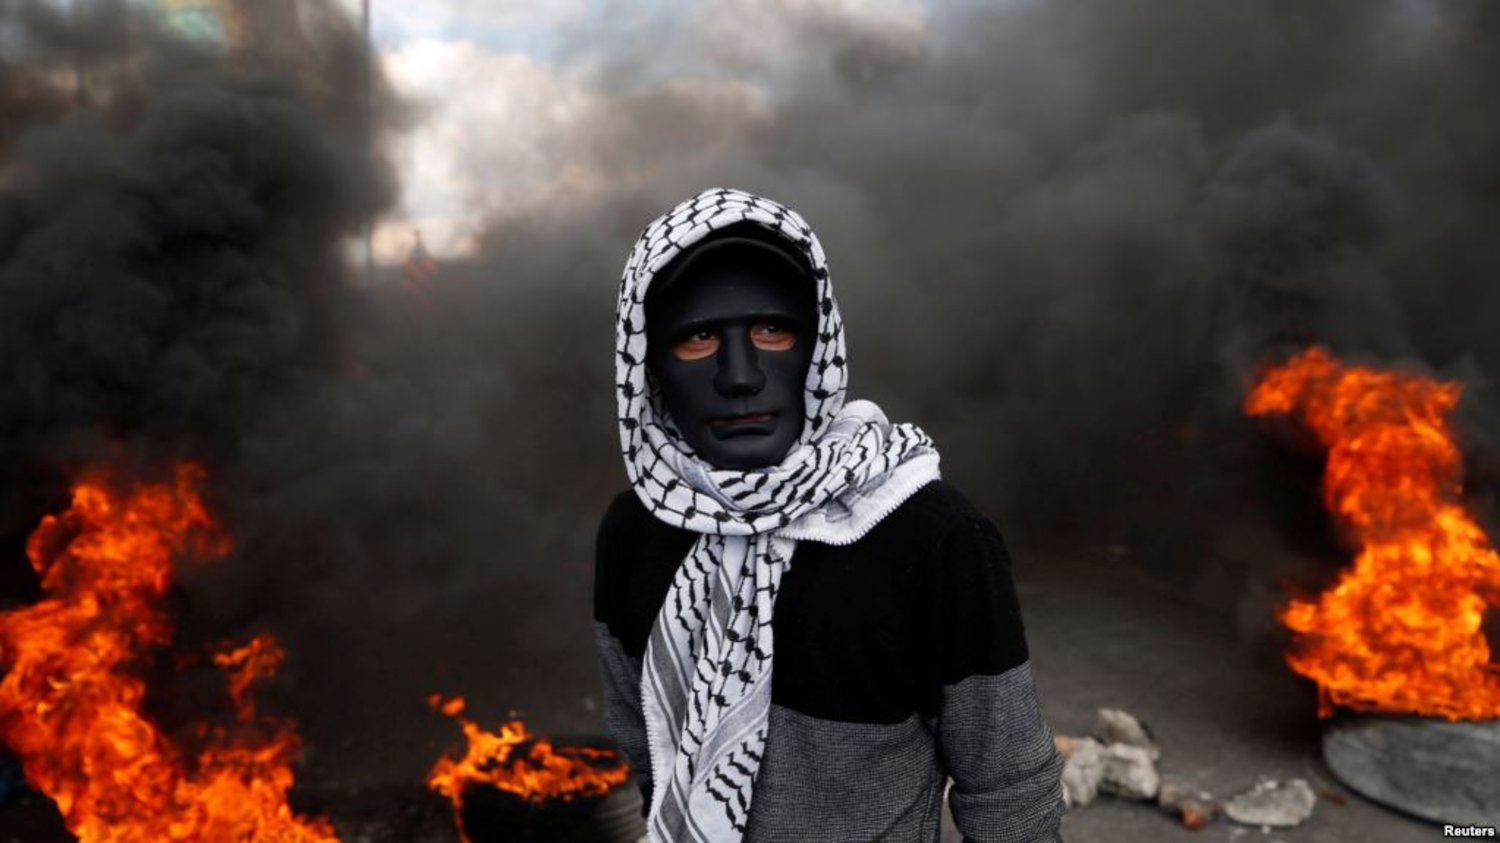 A Palestinian demonstrator stands near burning tires during clashes with Israeli troops. - Reuters 